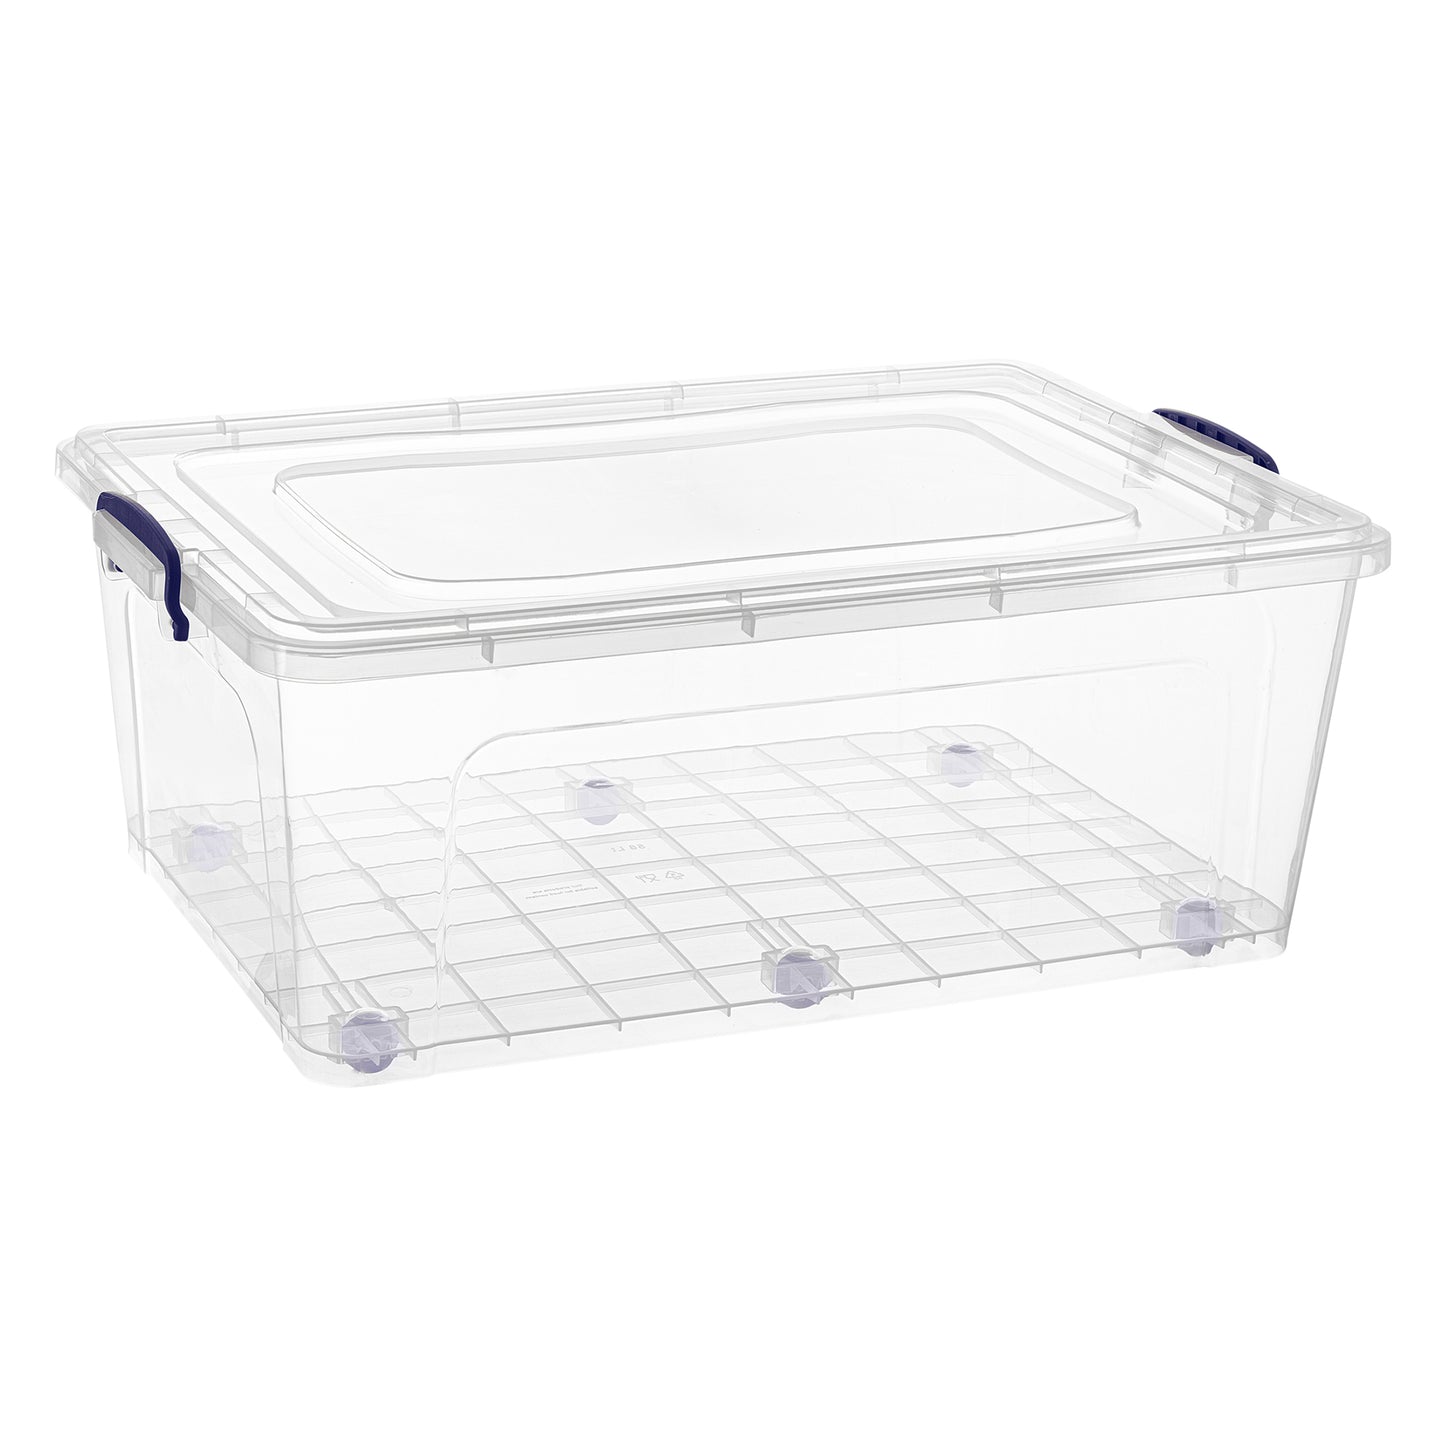 Superio 602 Storage Container 62 qt Clear with Blue Handles